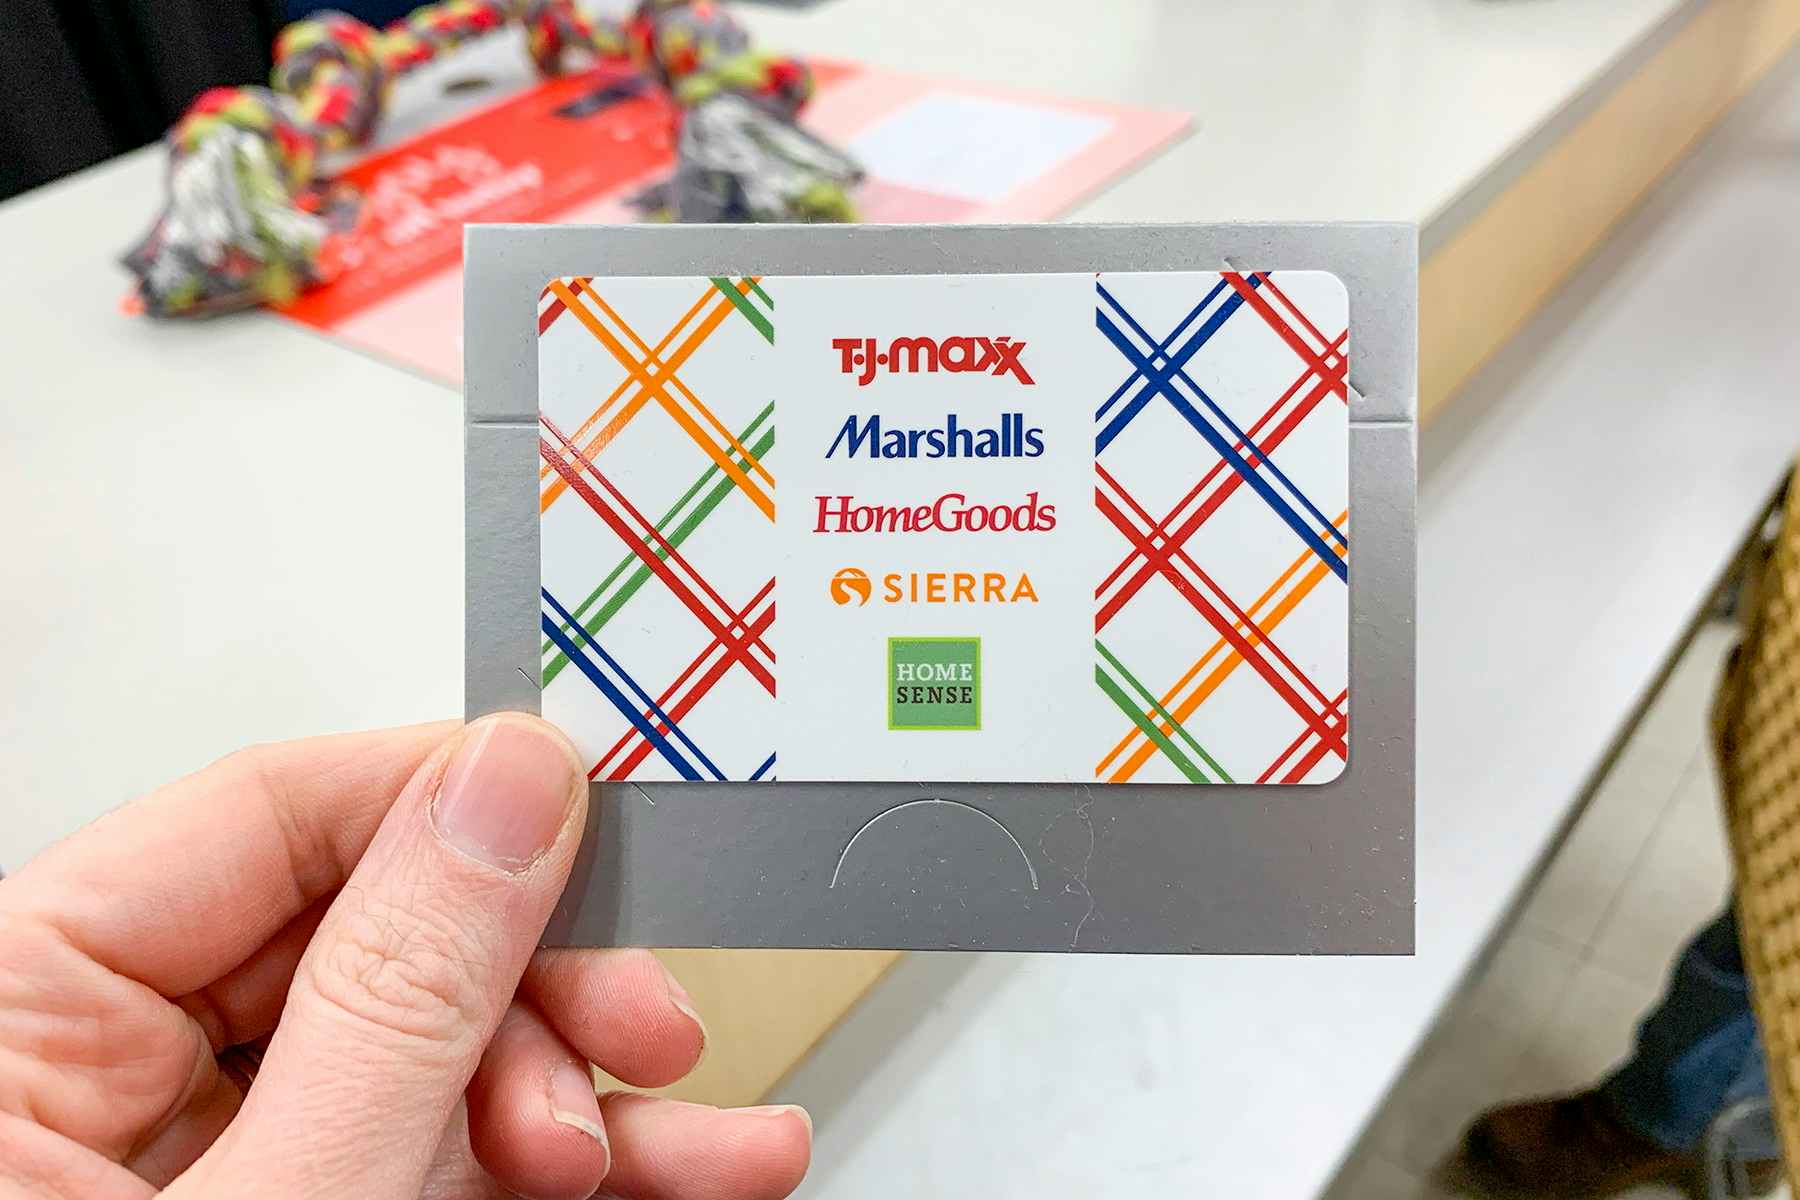 A single gift card with the stores, TJ Maxx, Marshalls, HomeGoods, Sierra, and Home Sense, printed on the front of it.